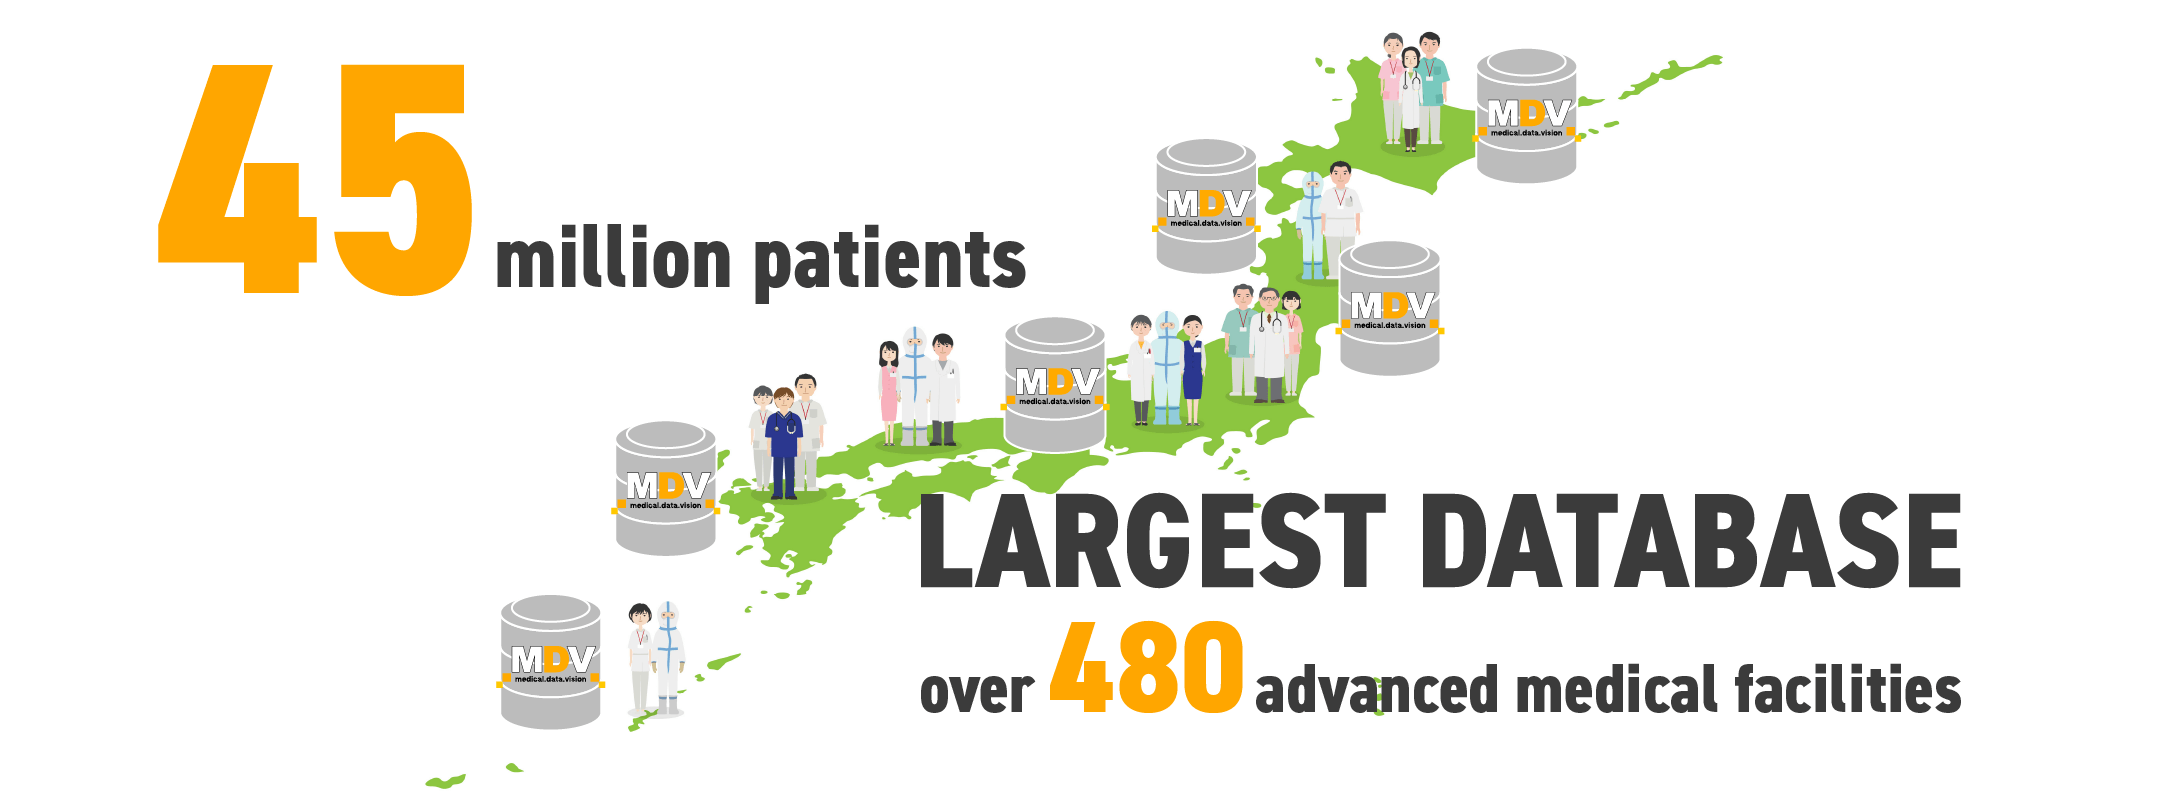 45 million patients LARGEST DATABASE over 480 advanced medical facilities